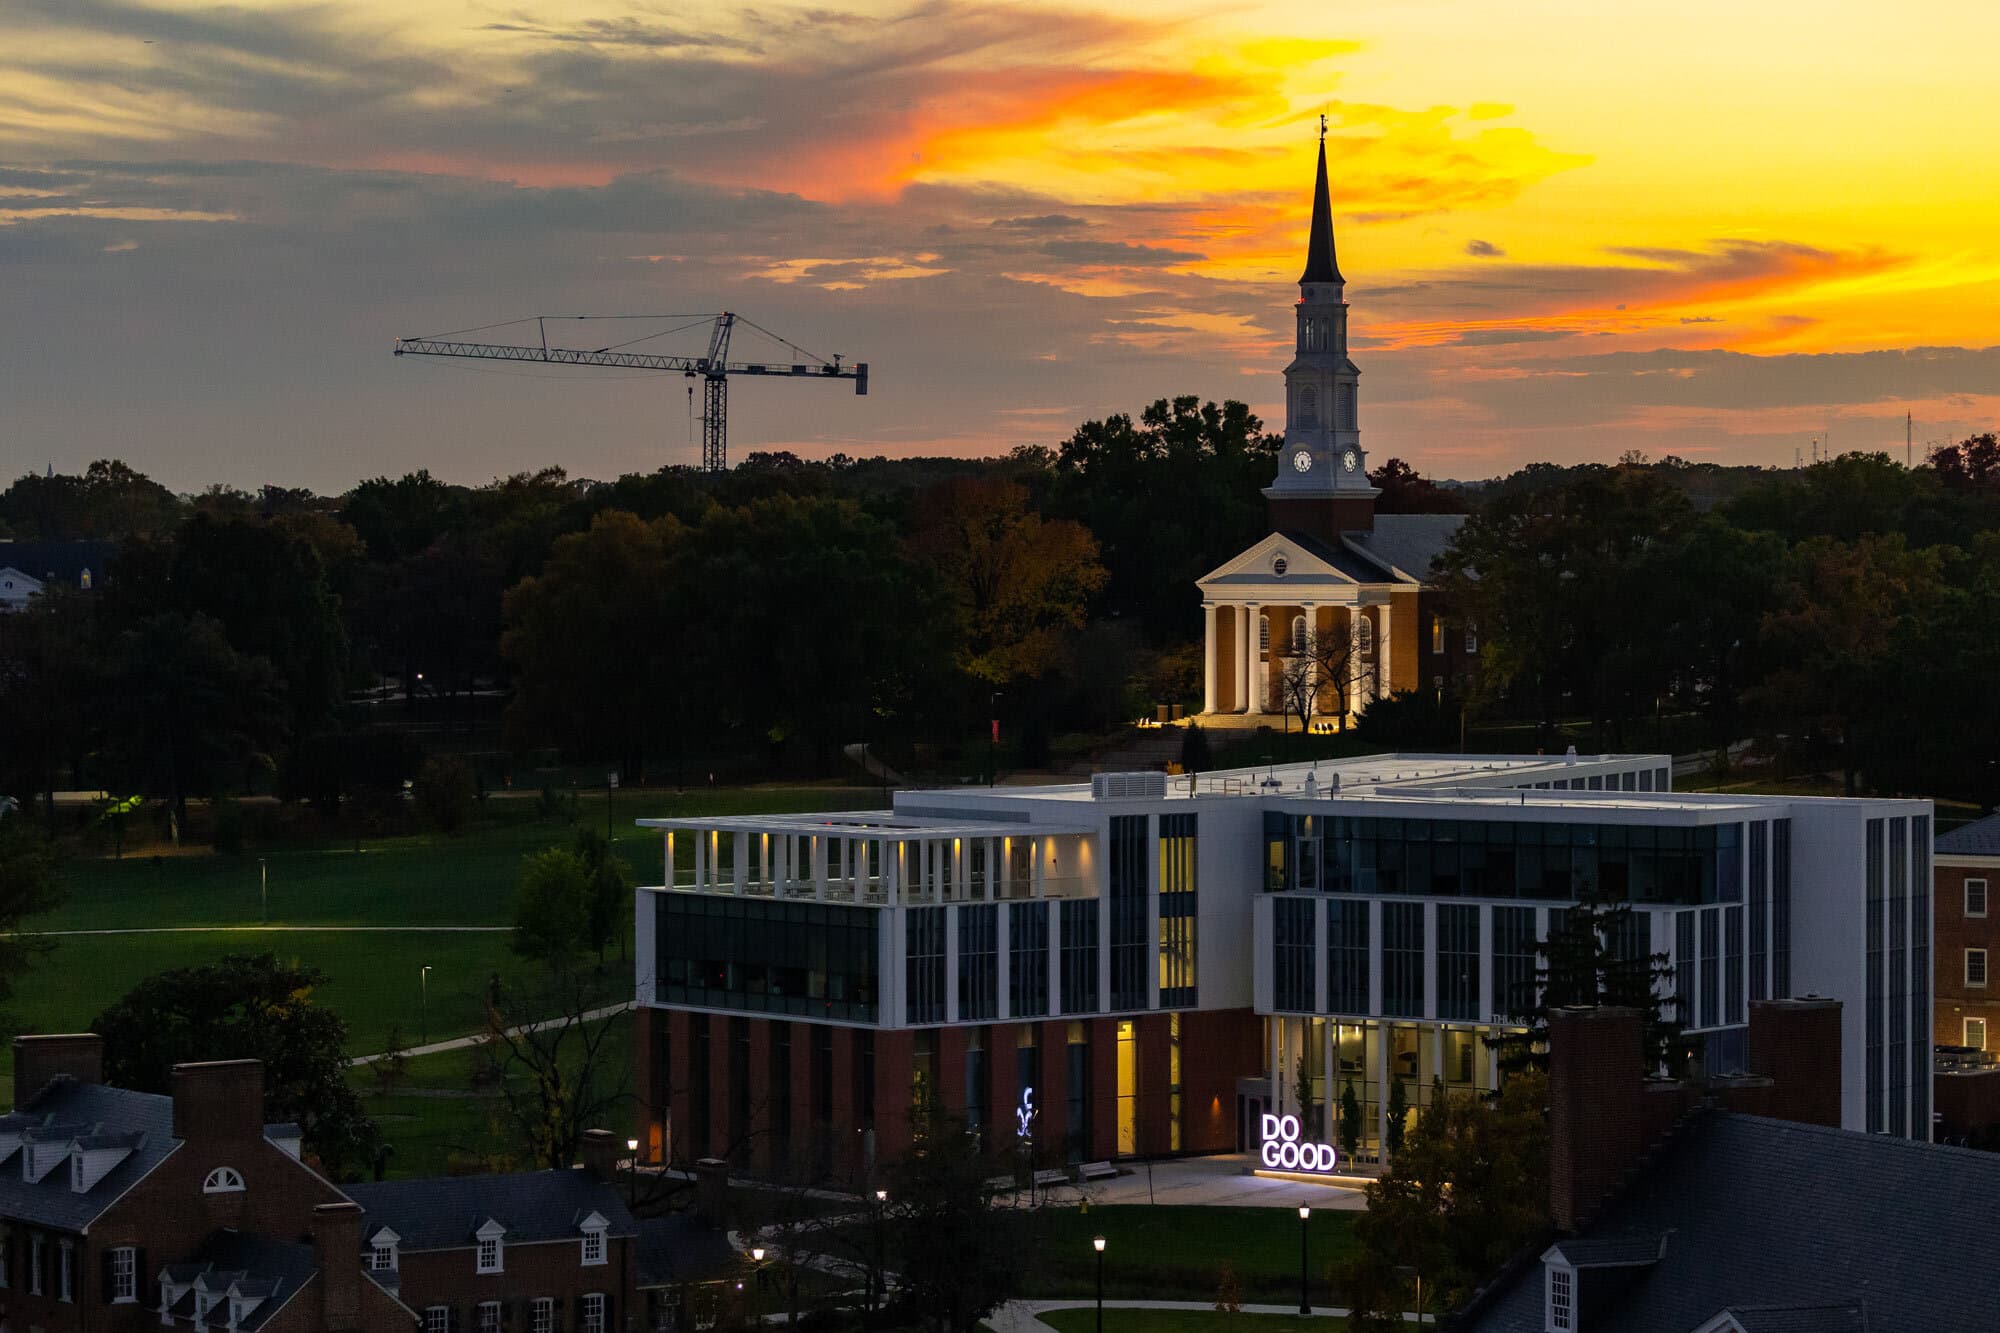 sunset view of Thurgood Marshall Hall, Memorial Chapel with a crane in the background